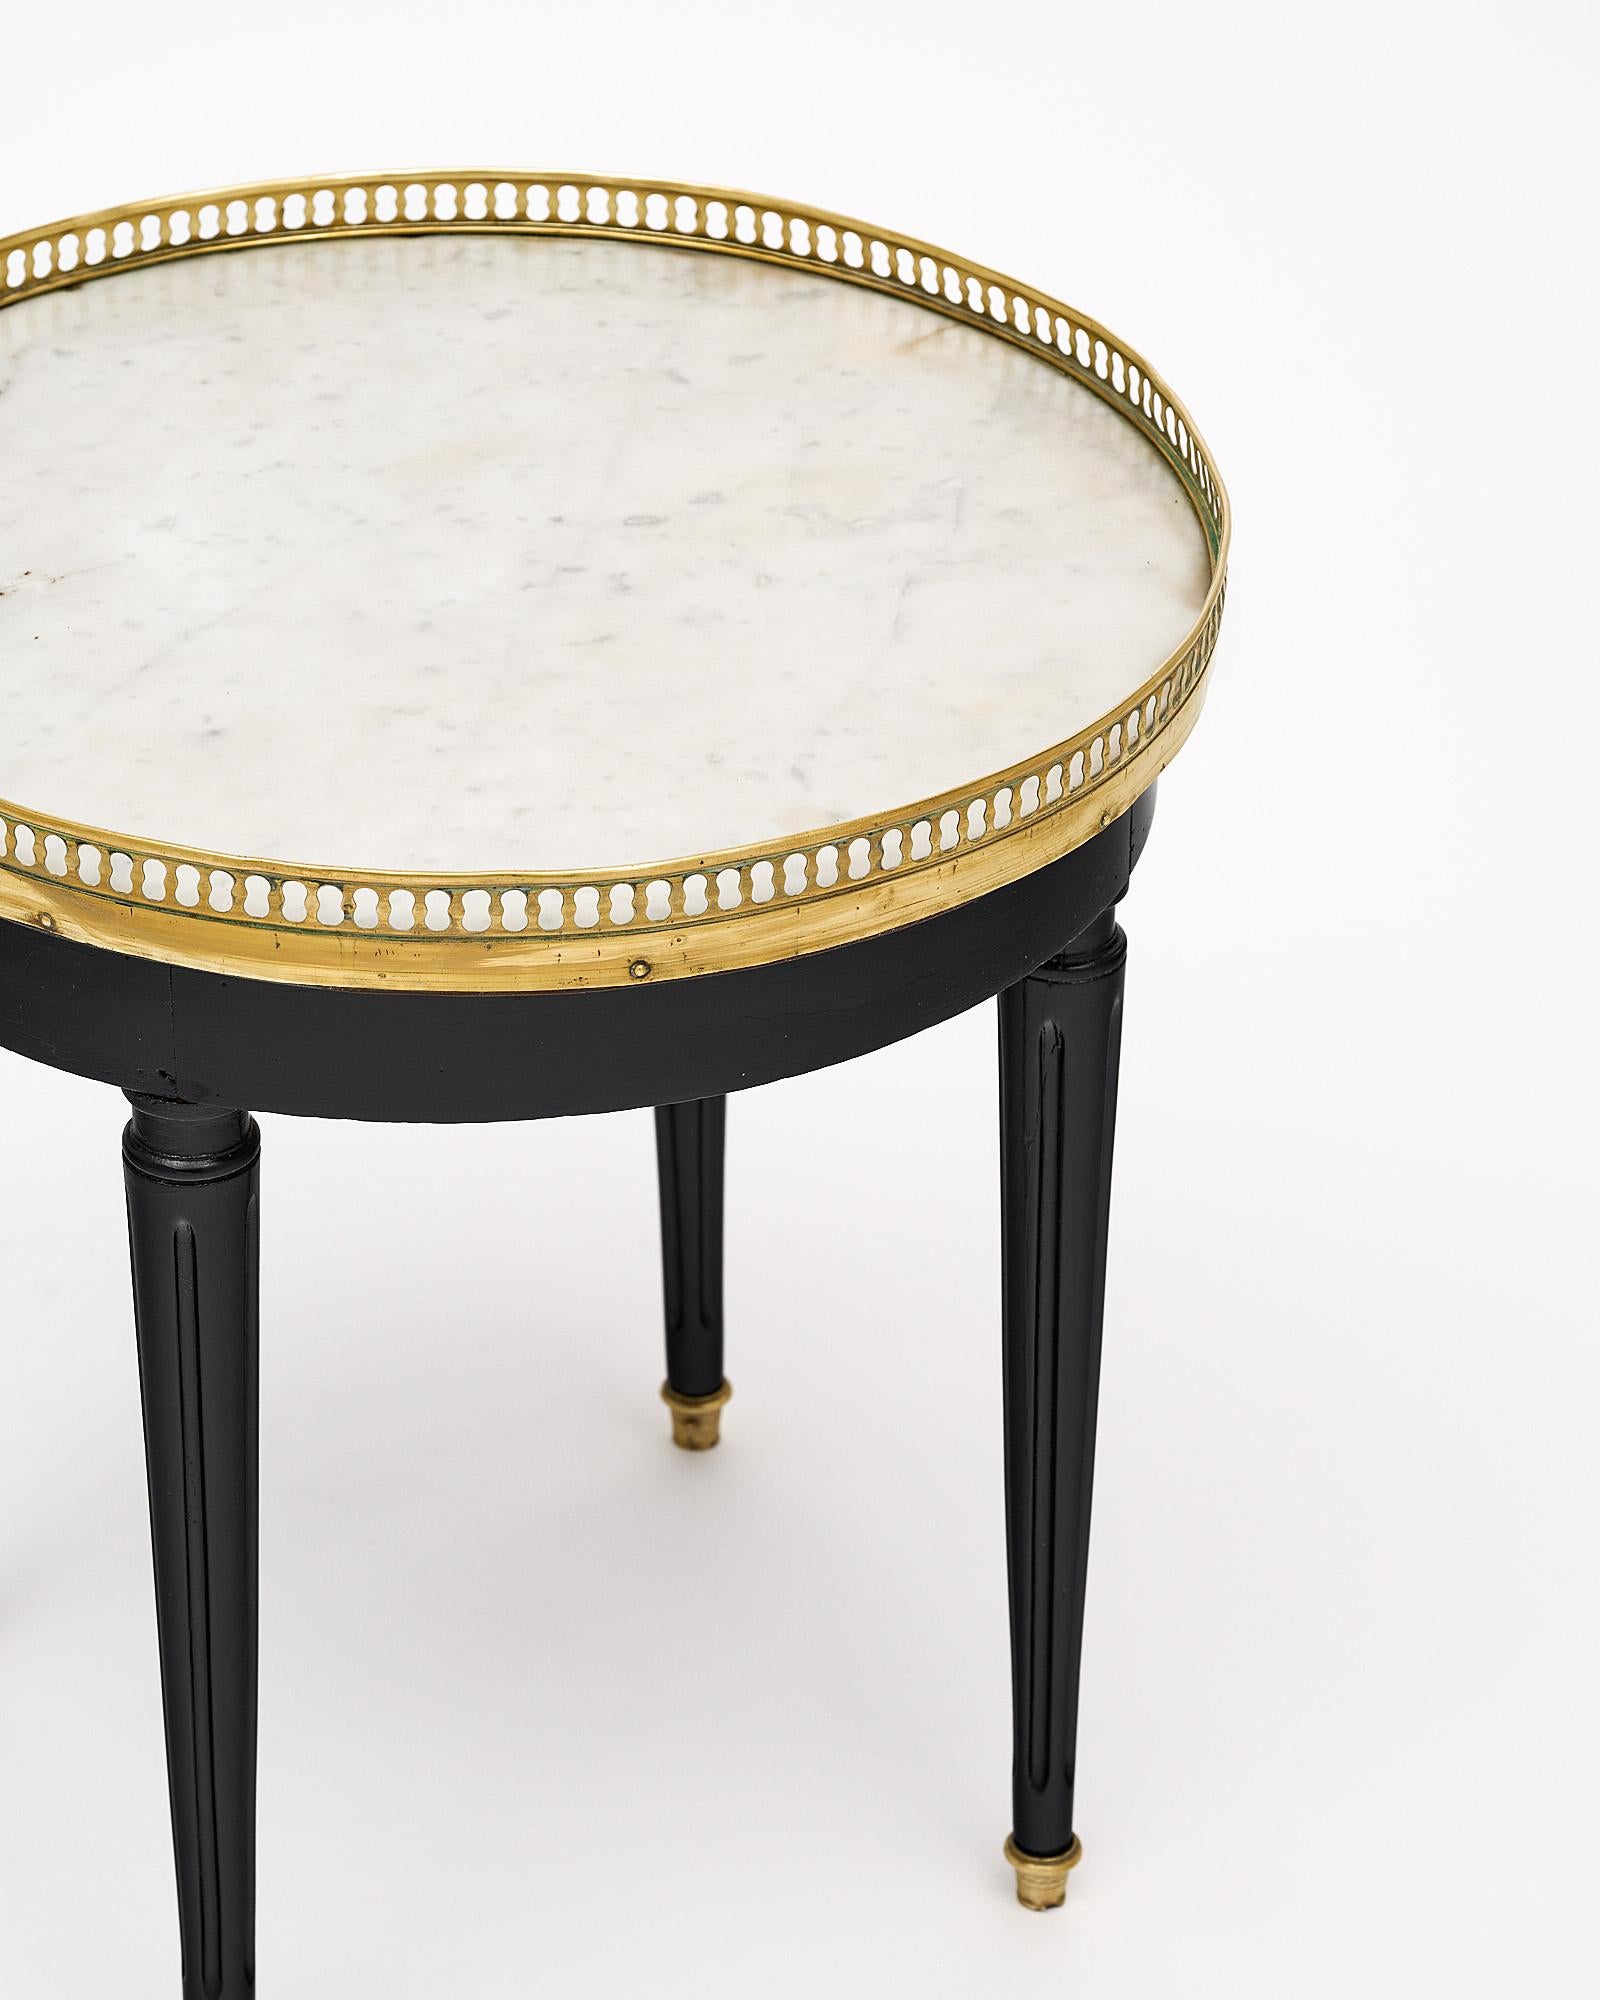 Side table, French, in the Louis XVI style. This petite “bouillotte” table is finished in an ebony lustrous French polish. The table features a Carrara marble top trimmed with an opened brass gallery and four tapered and fluted legs.